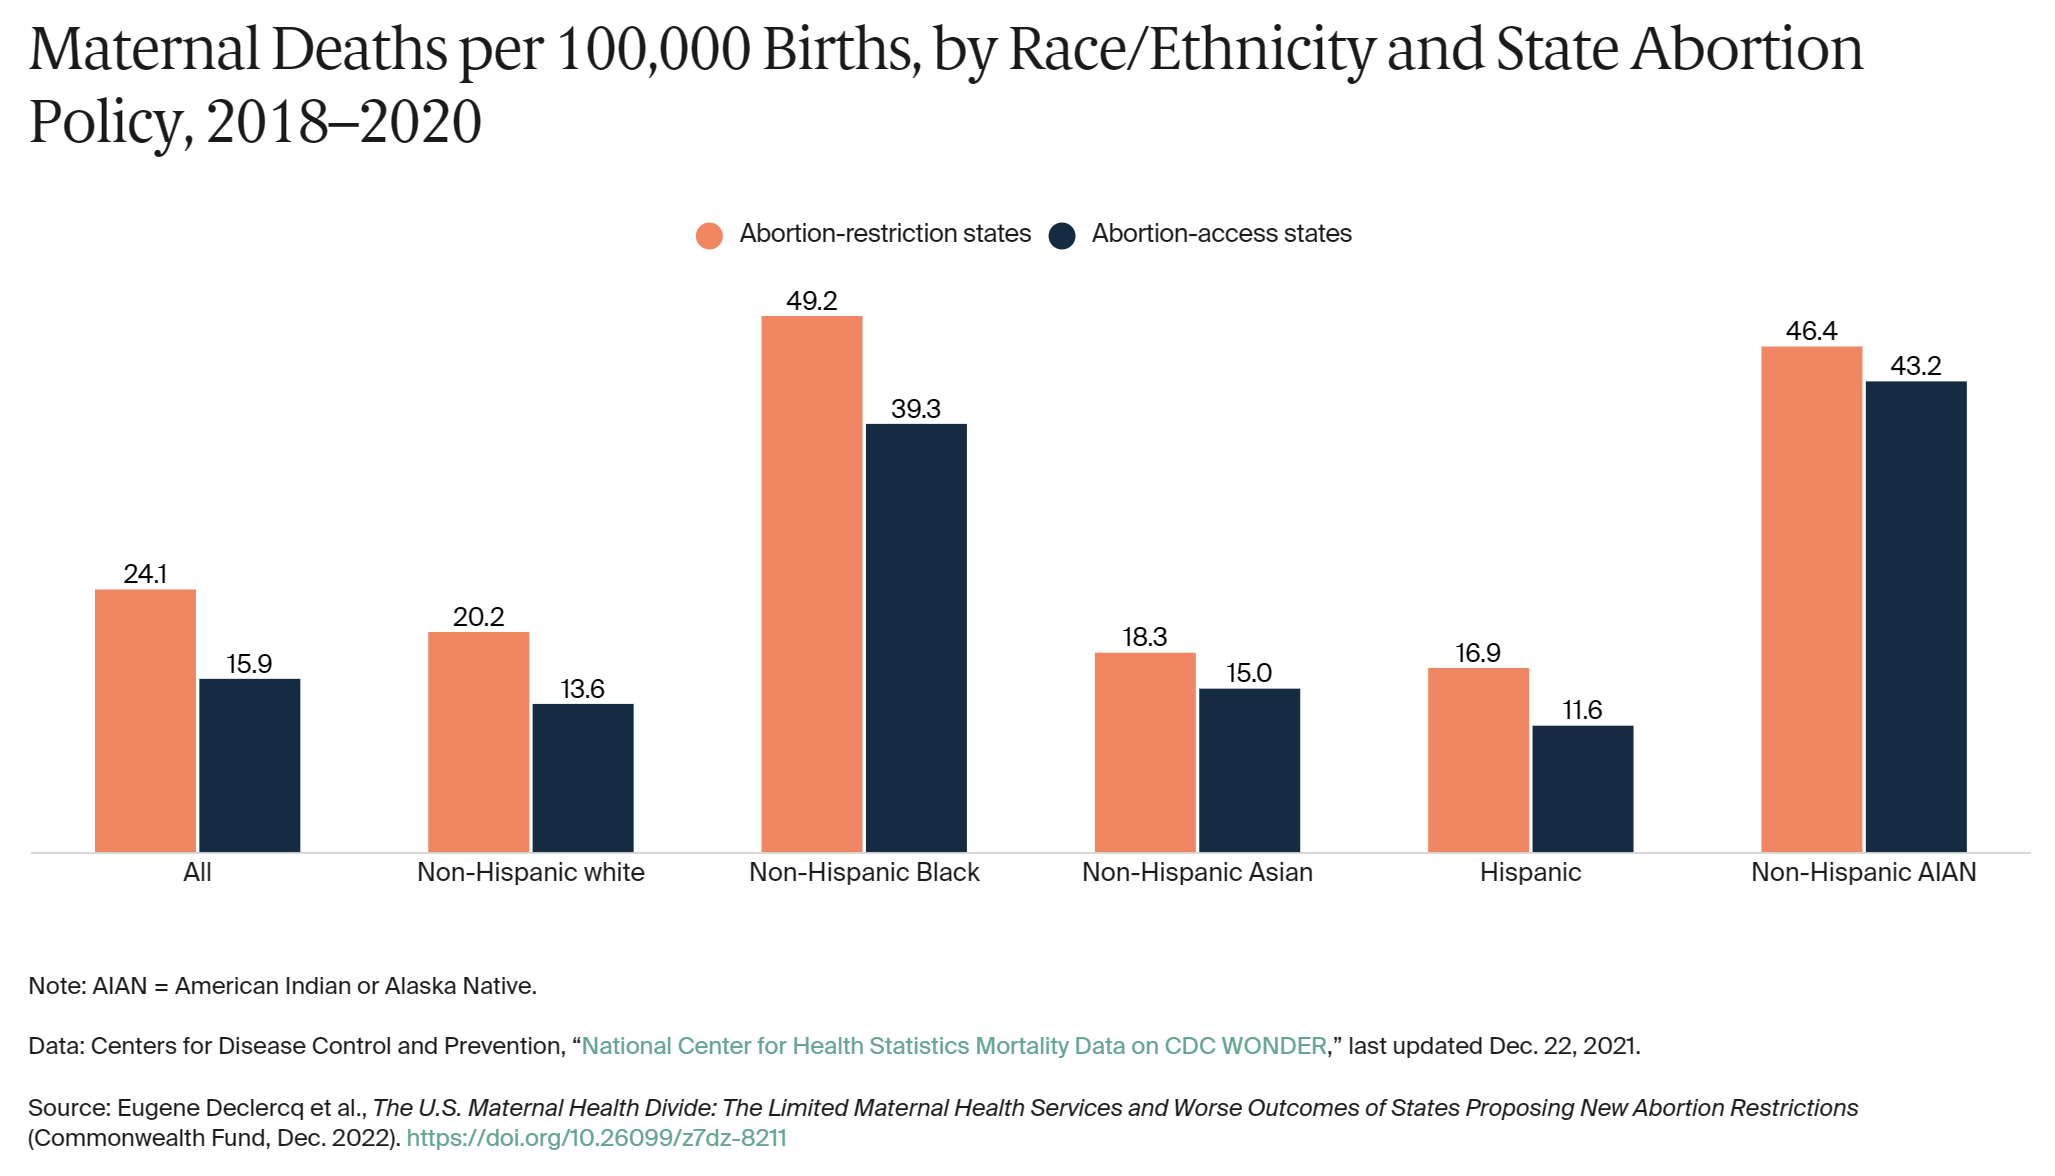 Maternal Deaths per 100,000 Births, by Race/Ethnicity and State Abortion Policy, 2018-2020. Graphic: Commonwealth Fund